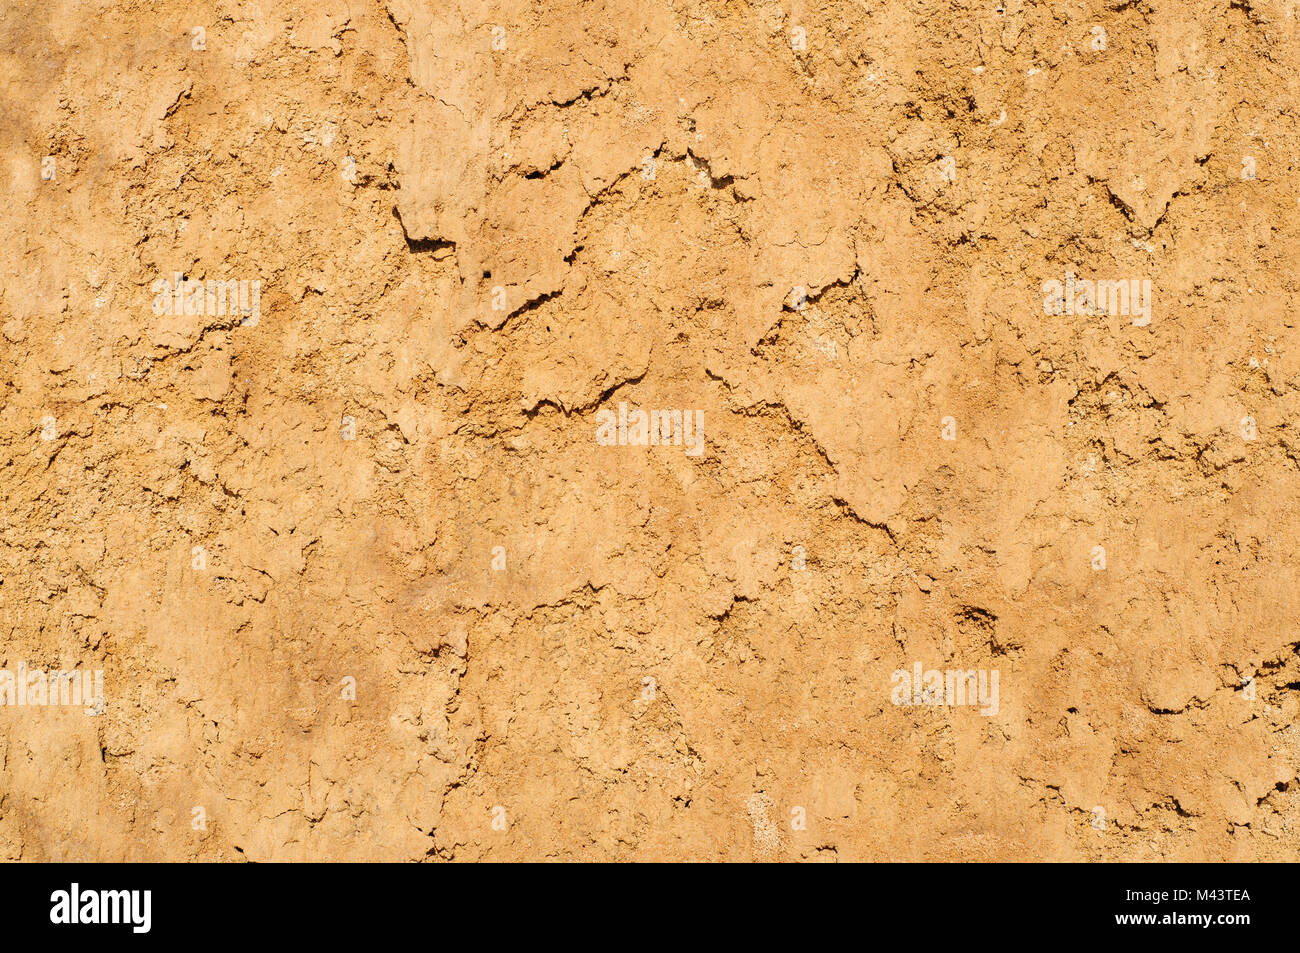 Clay soil texture background, dried surface Stock Photo